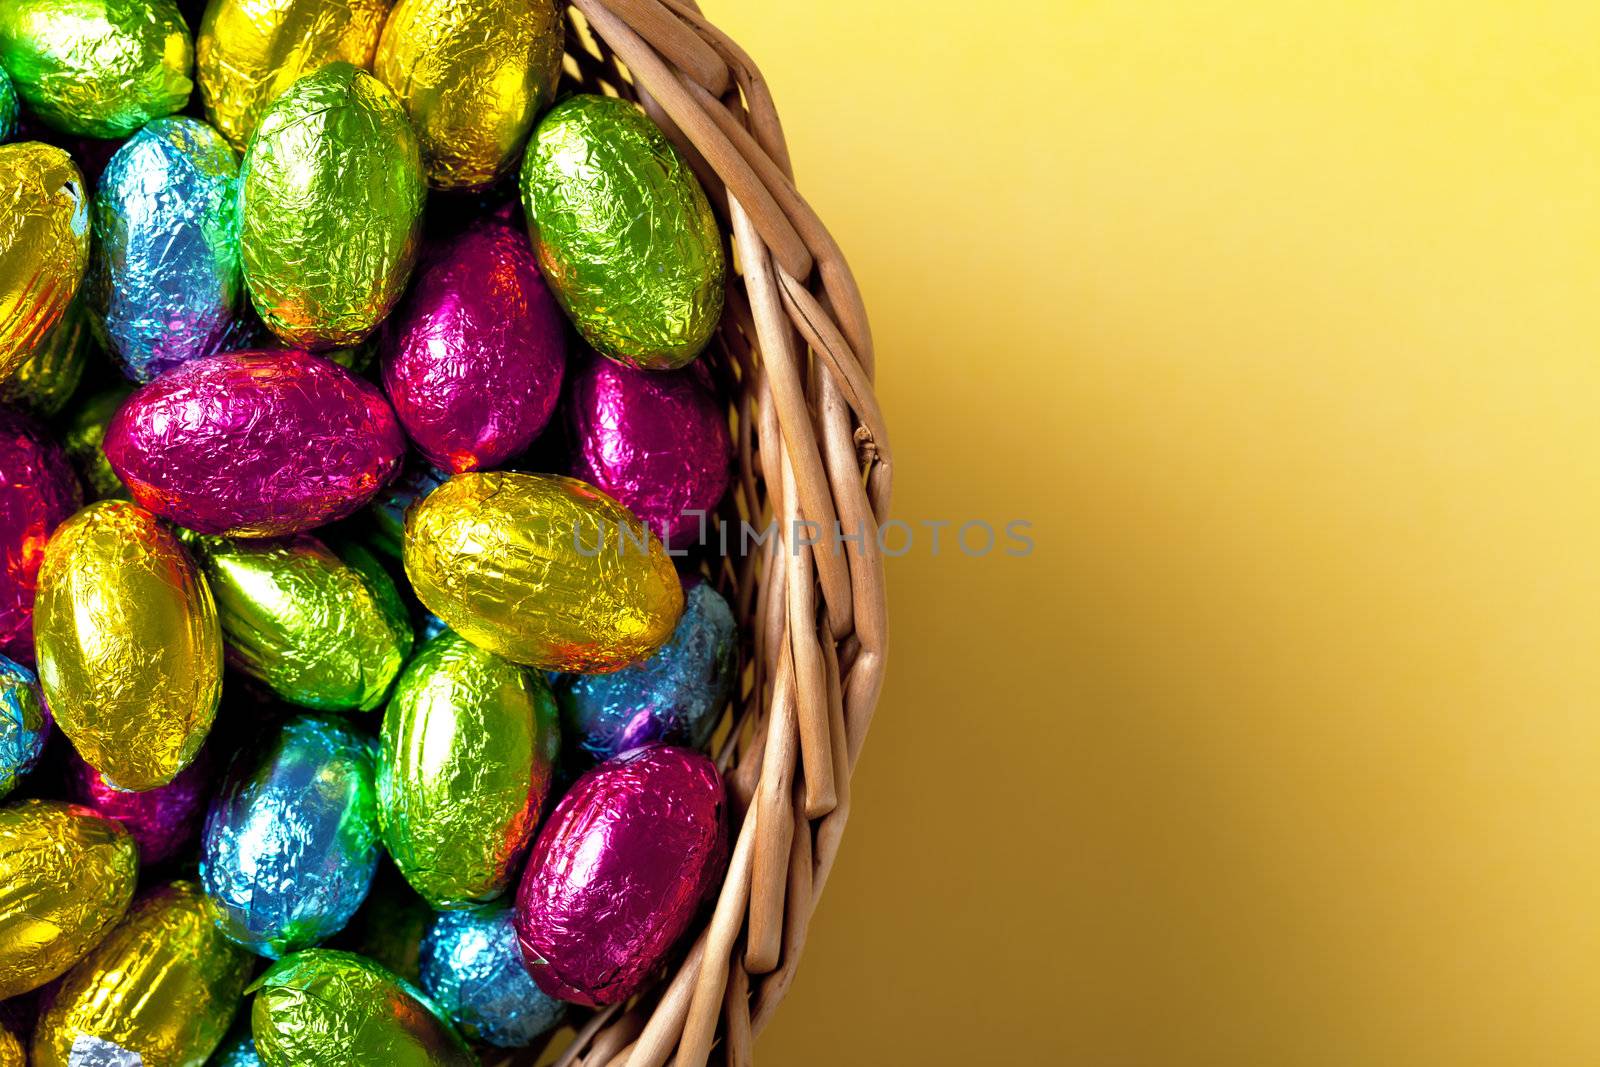 Easter basket with chocolate eggs on yellow paper background, Top view. Macro shot 